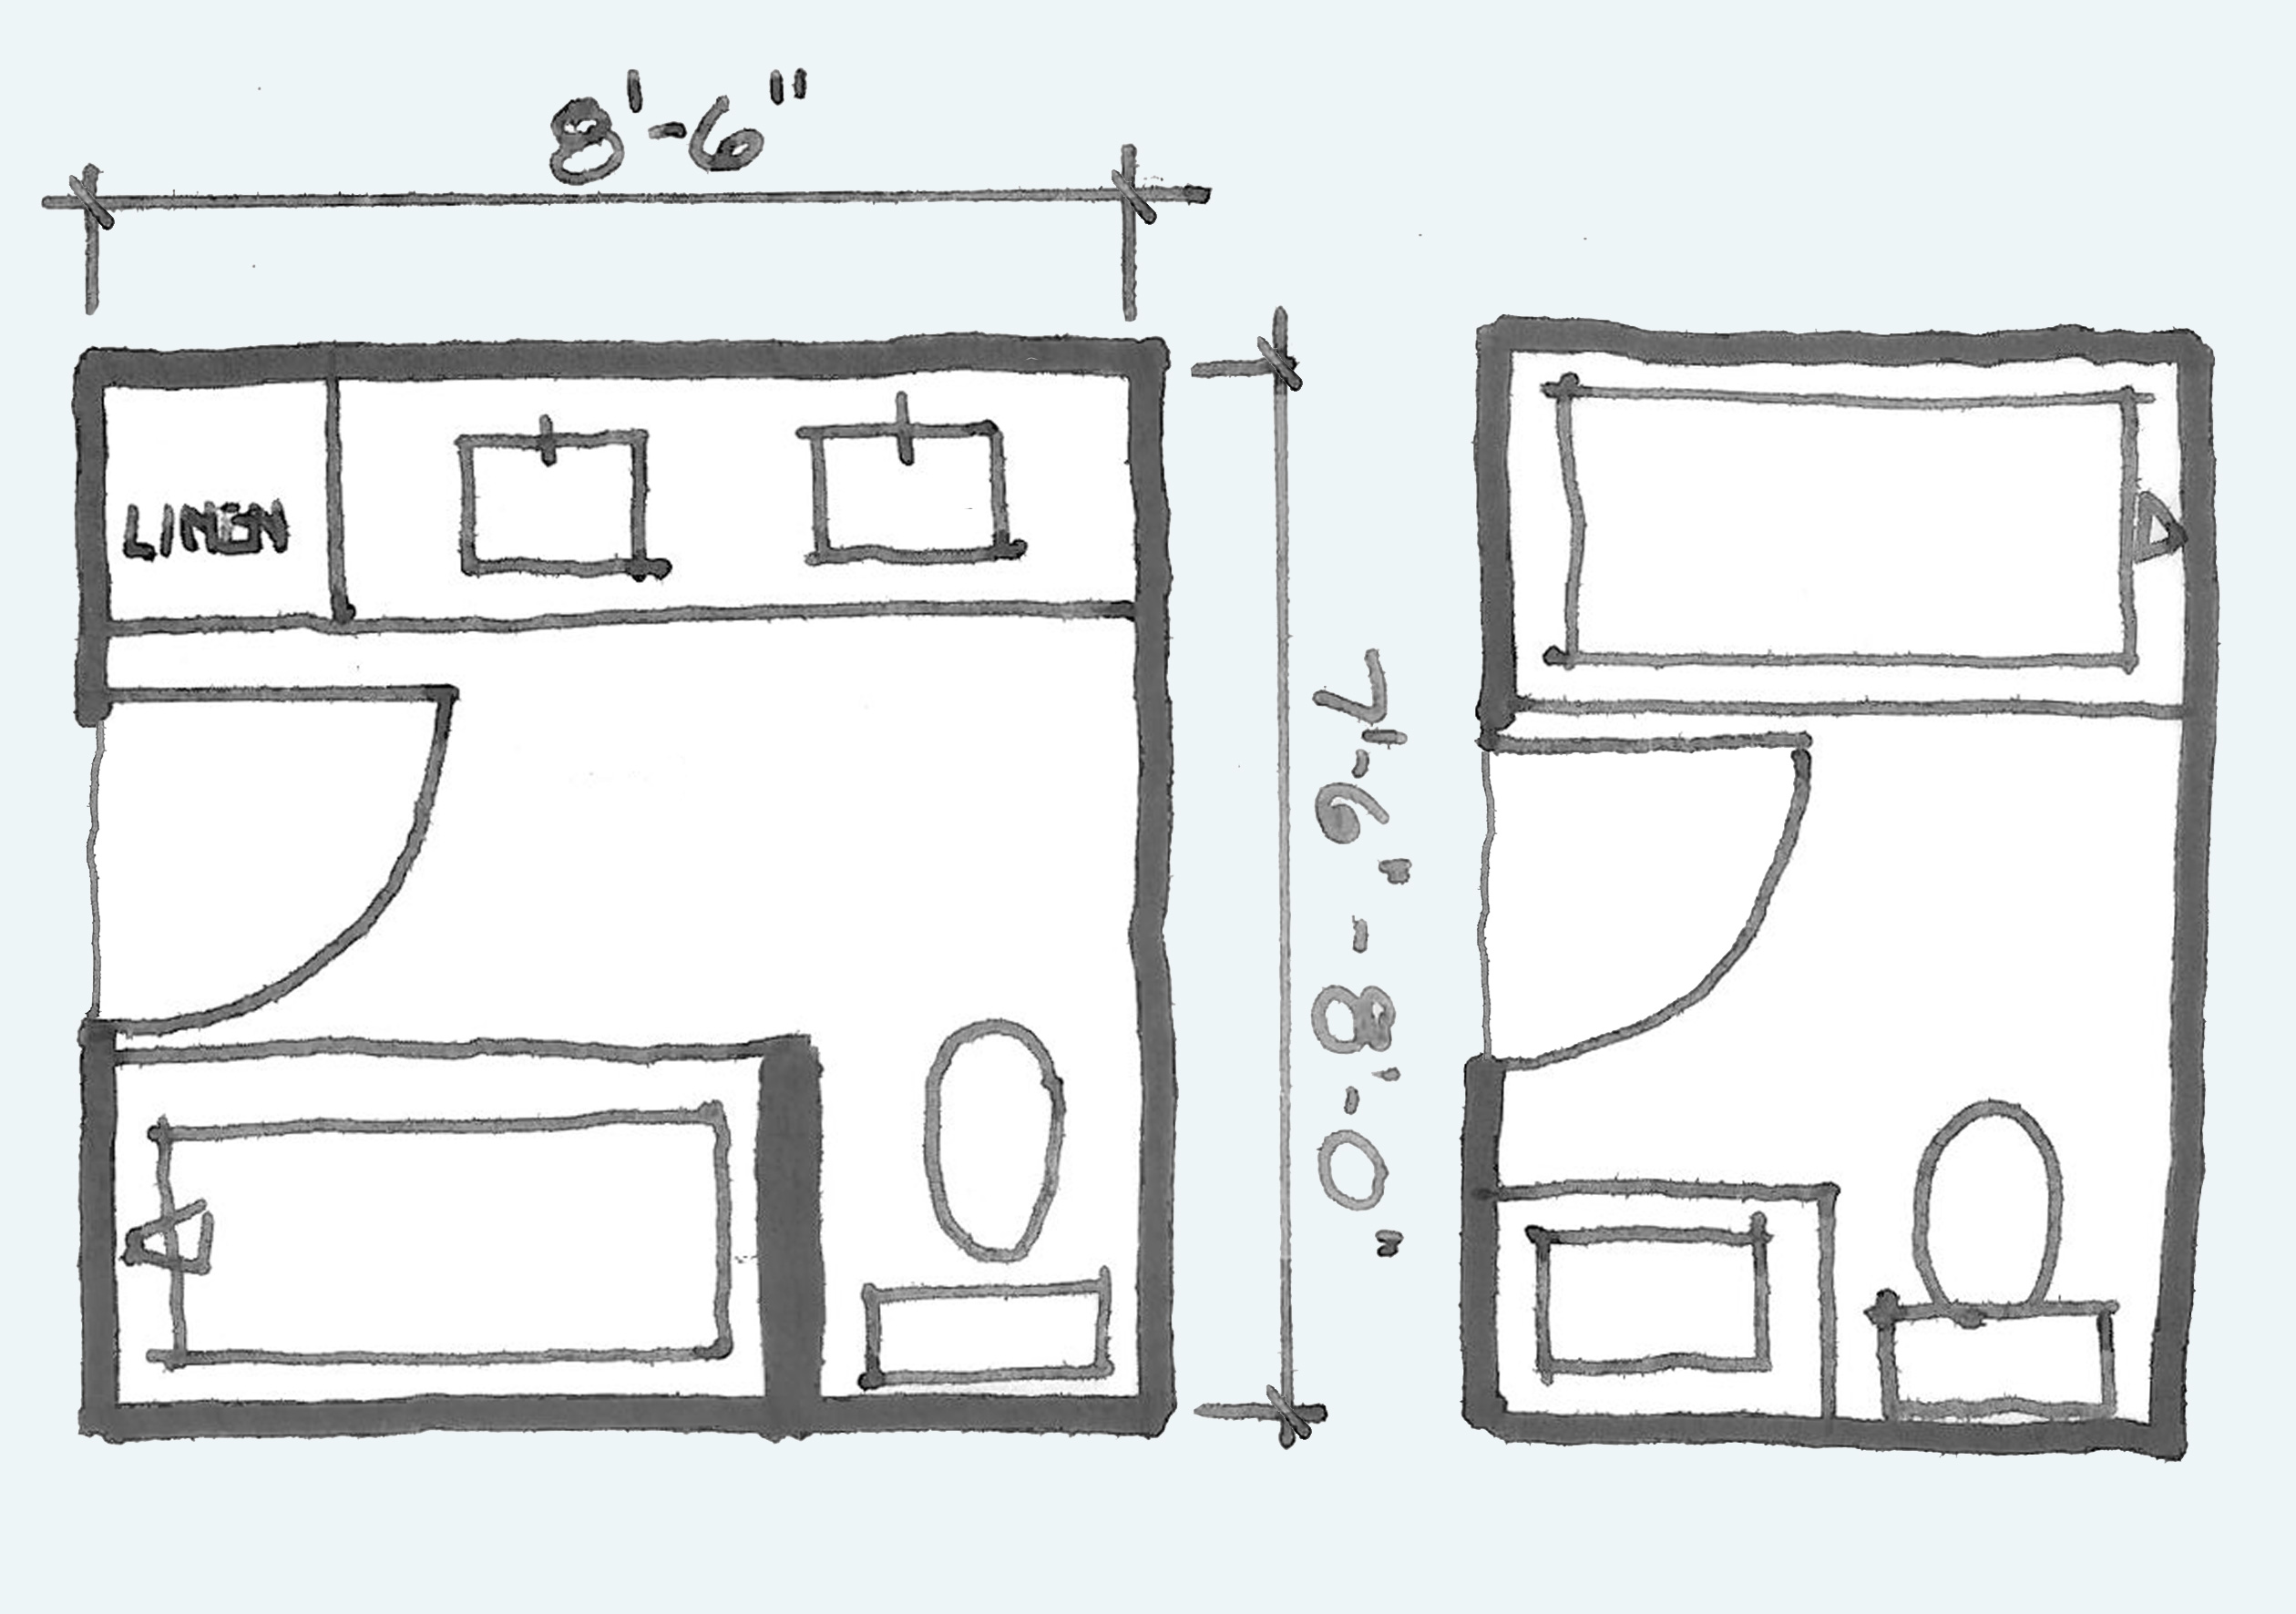 Common Bathroom Floor Plans: Rules of Thumb for Layout - Common Bathroom Floorplans Lesson 3 Alt